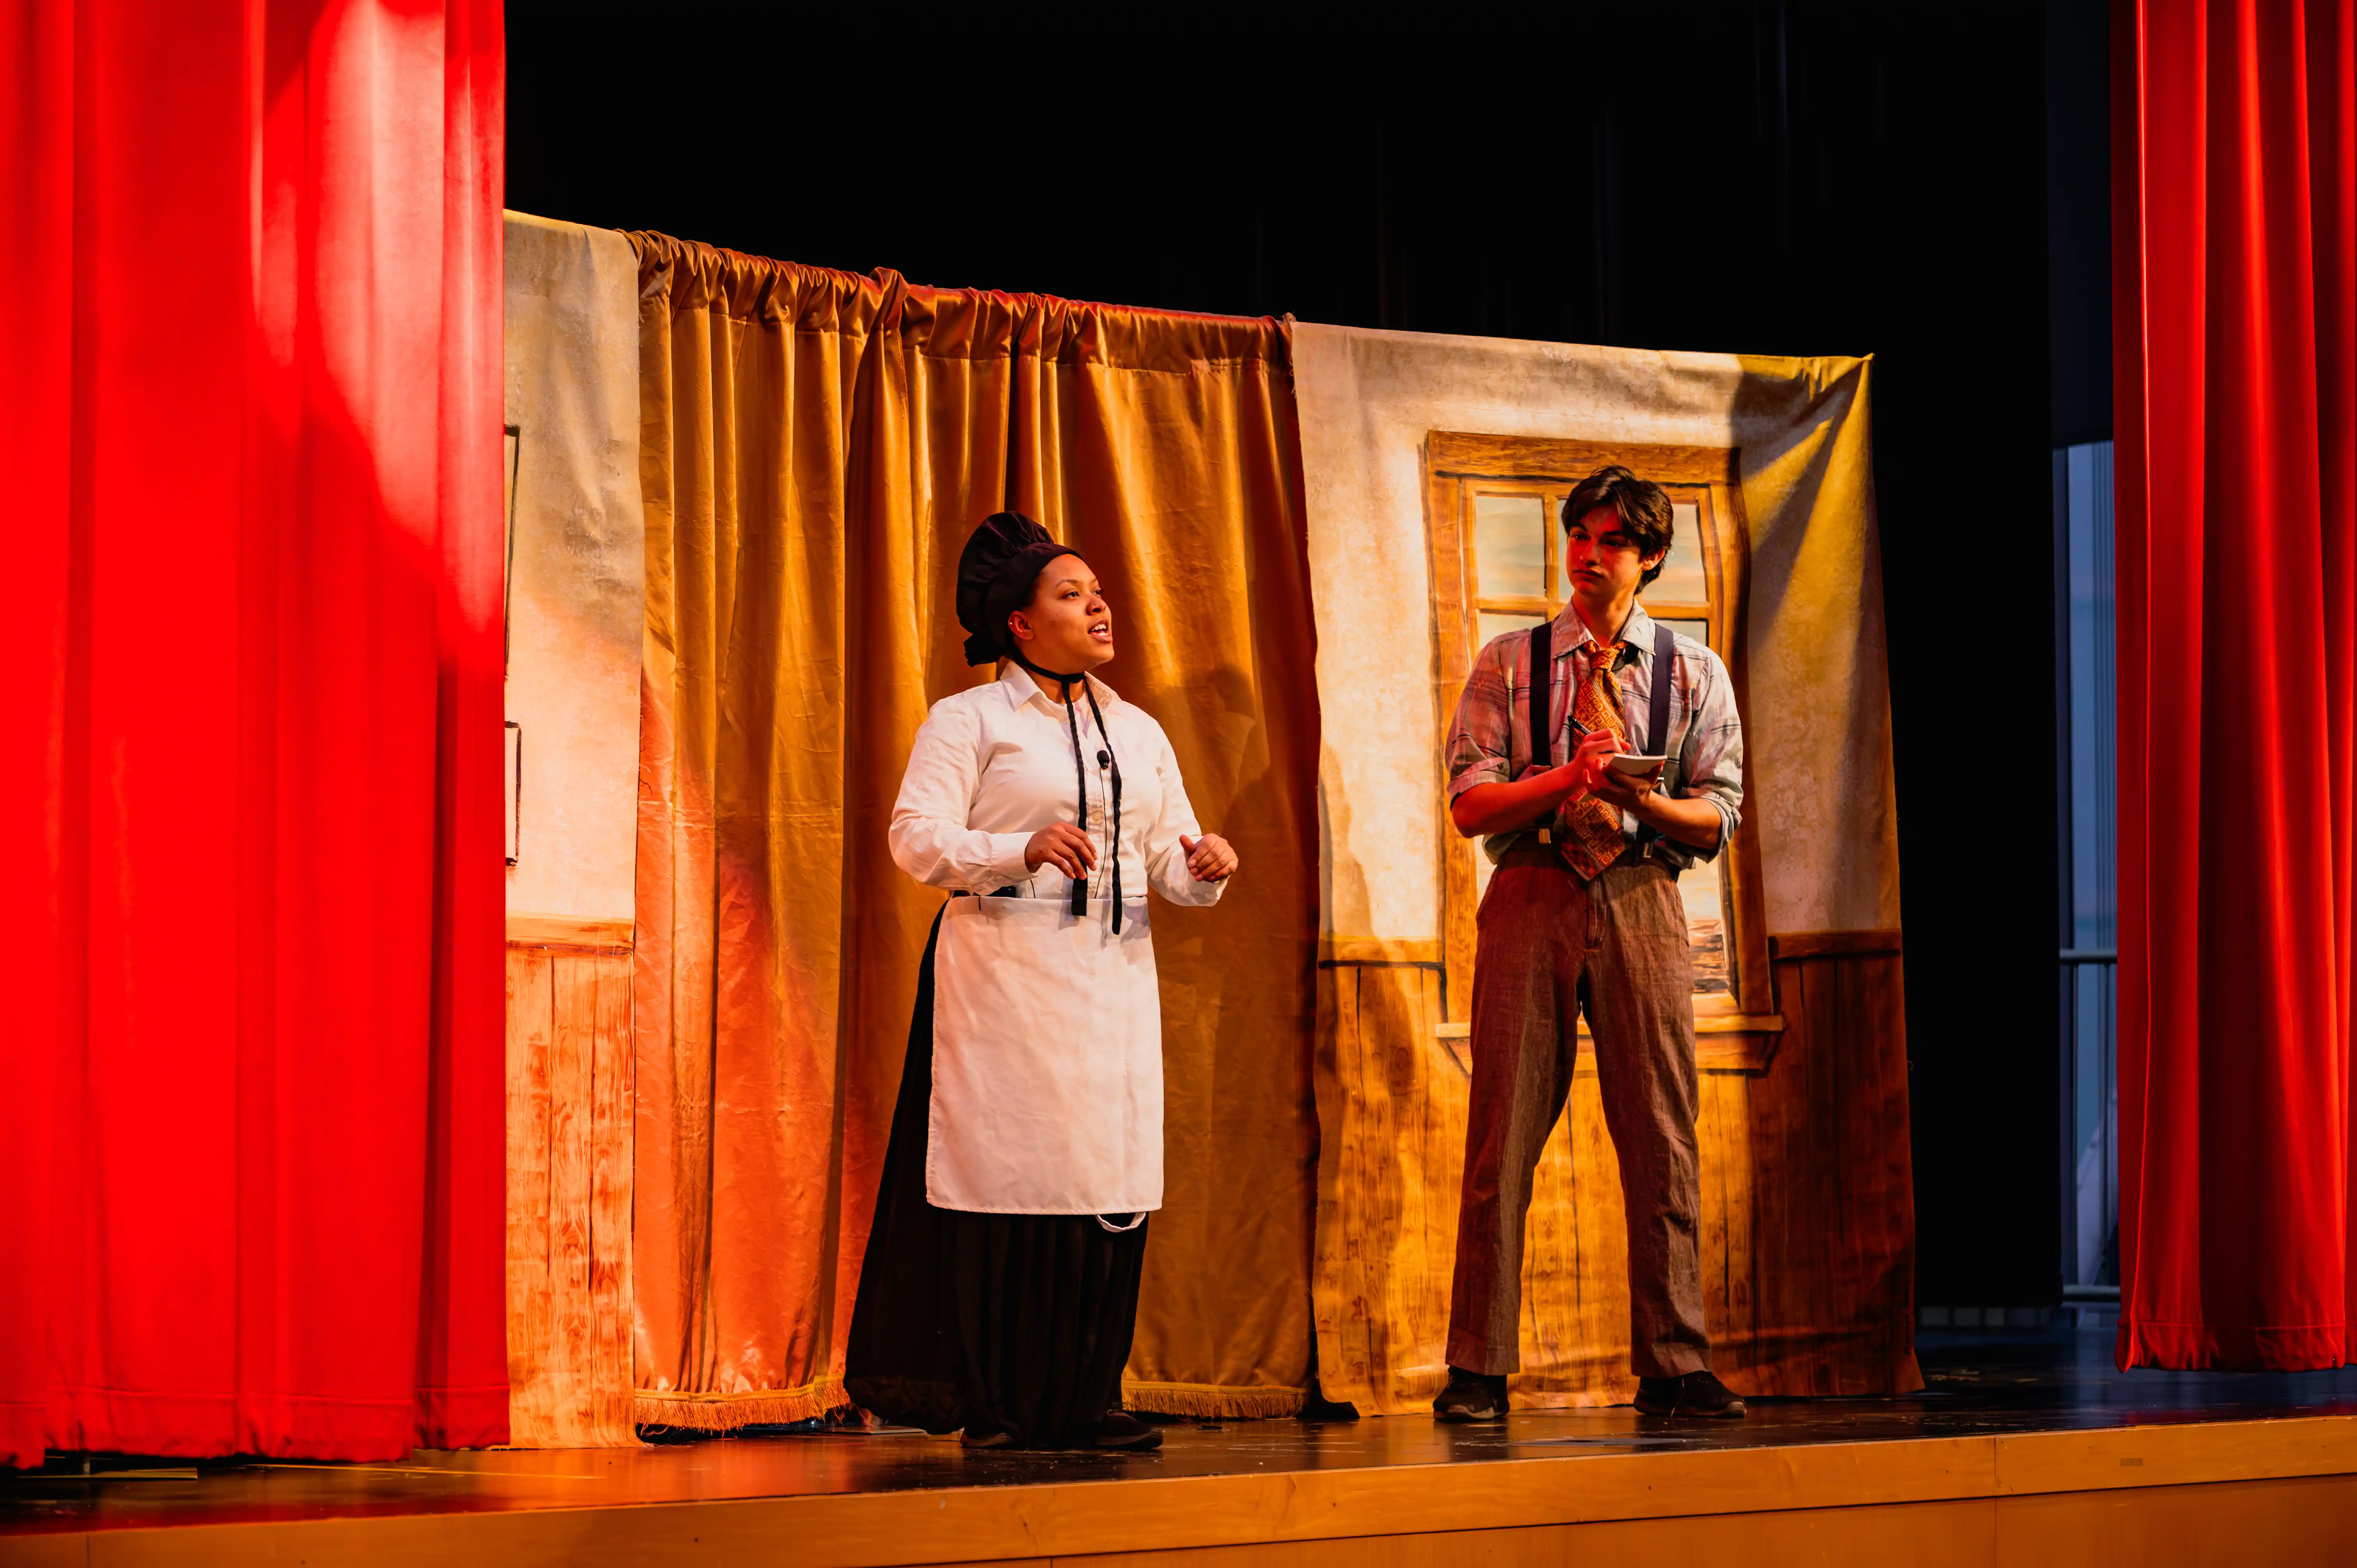 Two actors on stage performing in a play, with one dressed as a chef and the other wearing suspenders, in front of a curtain.